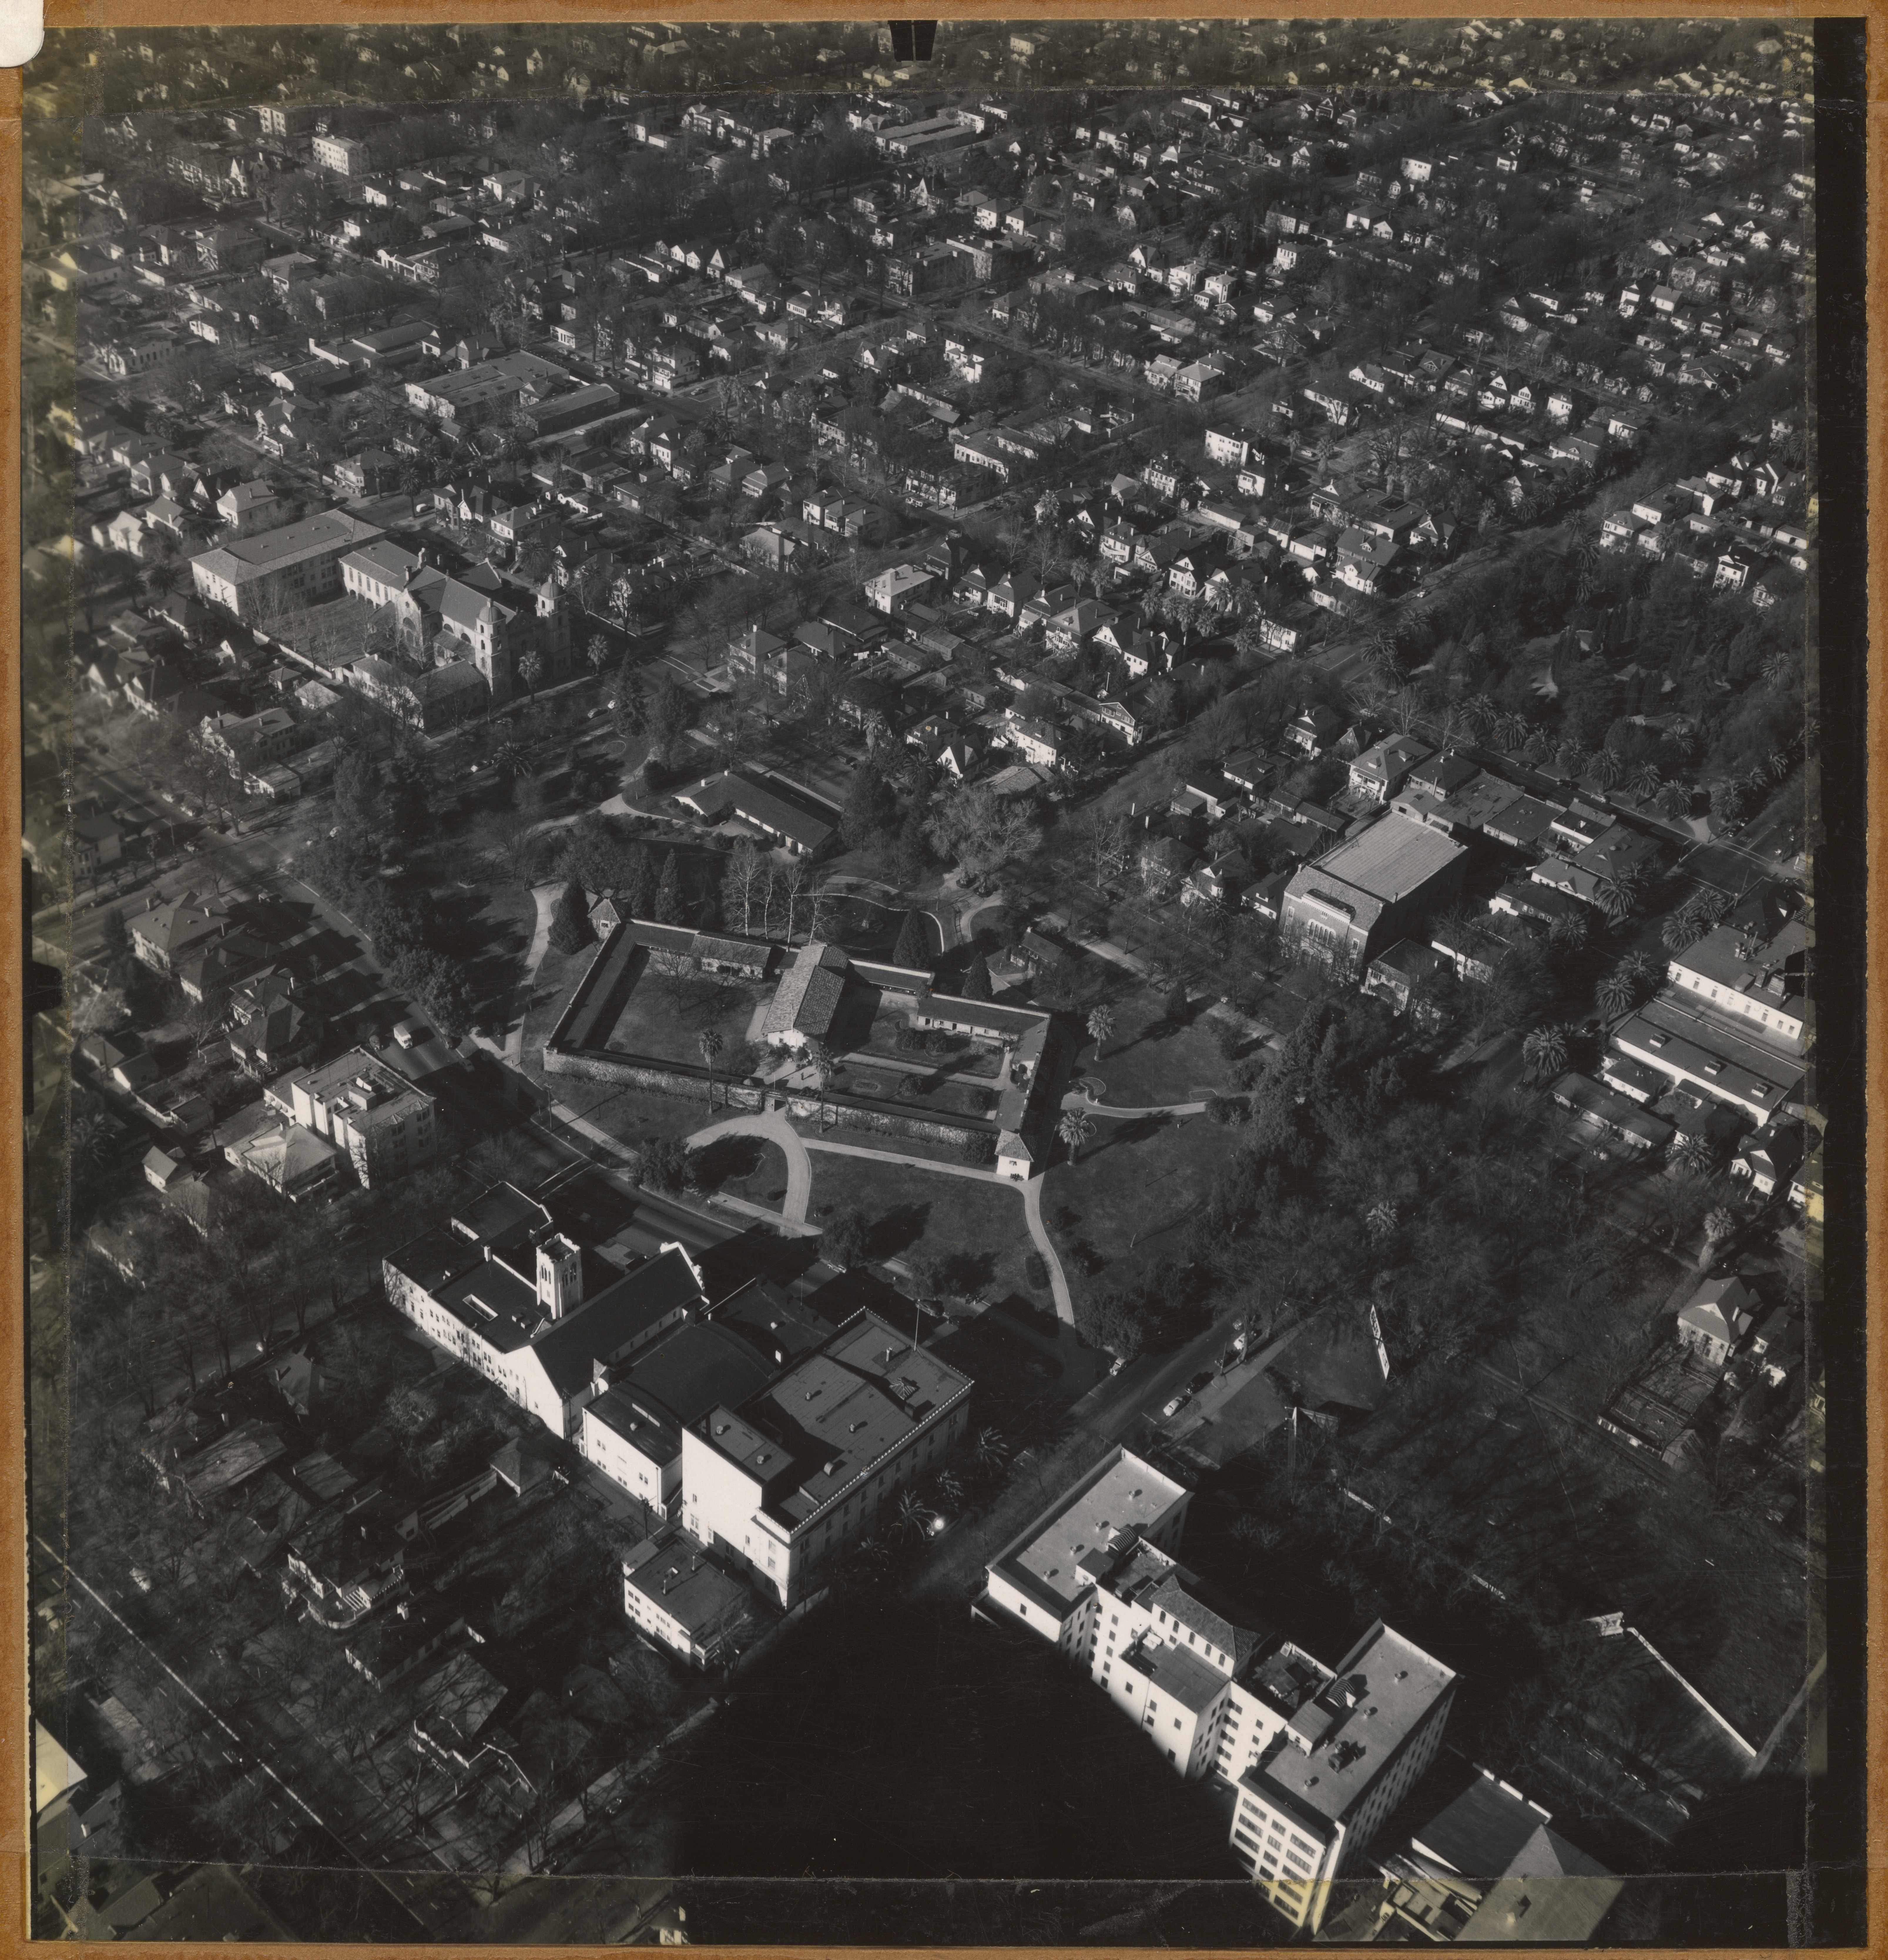 view from above Sutter's Fort in the 1940s